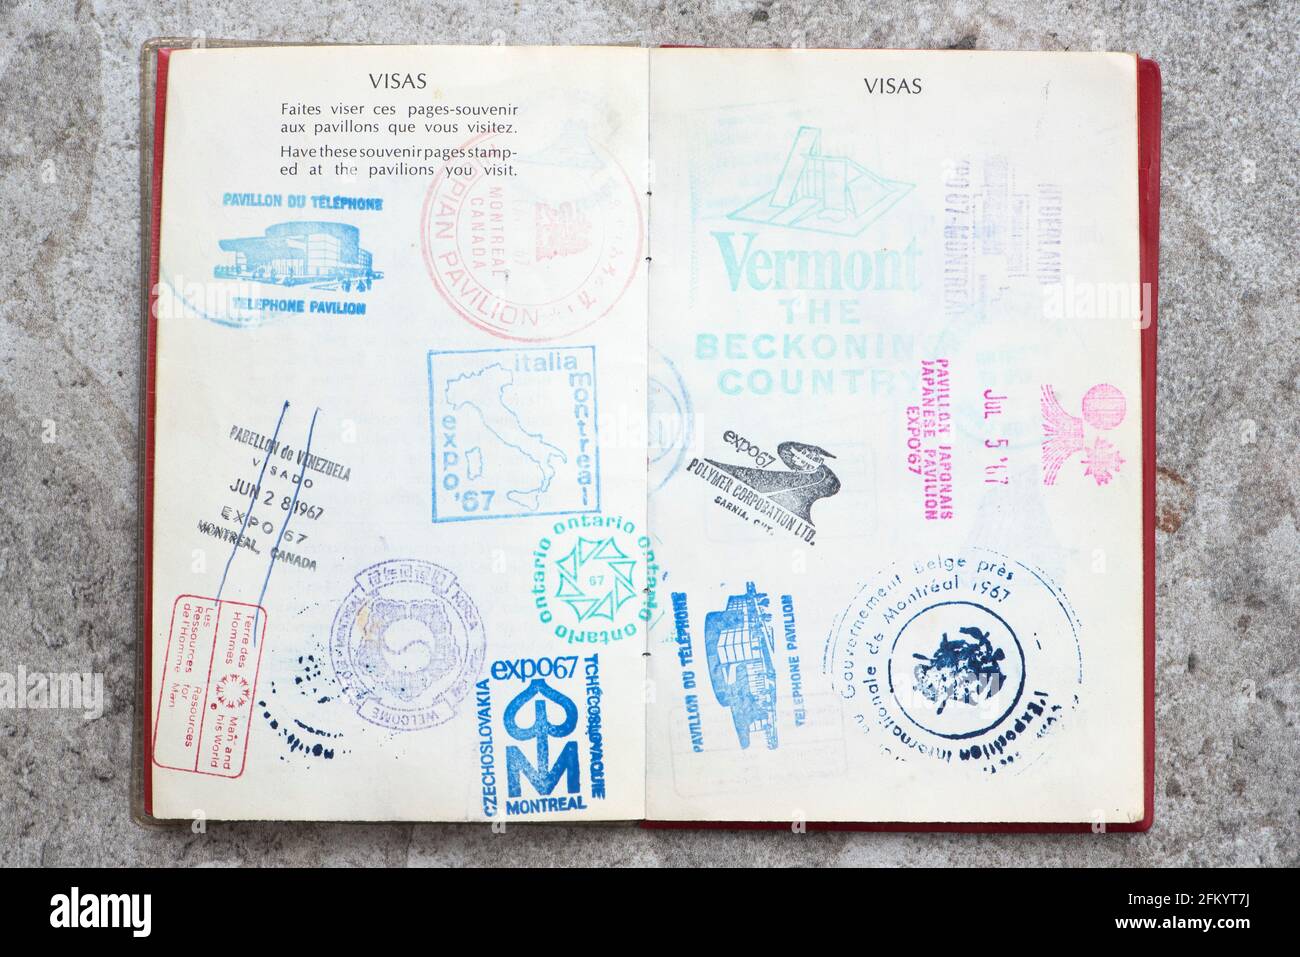 Montreal's Expo 67 passport pages with stamps from the different pavilions. Stock Photo